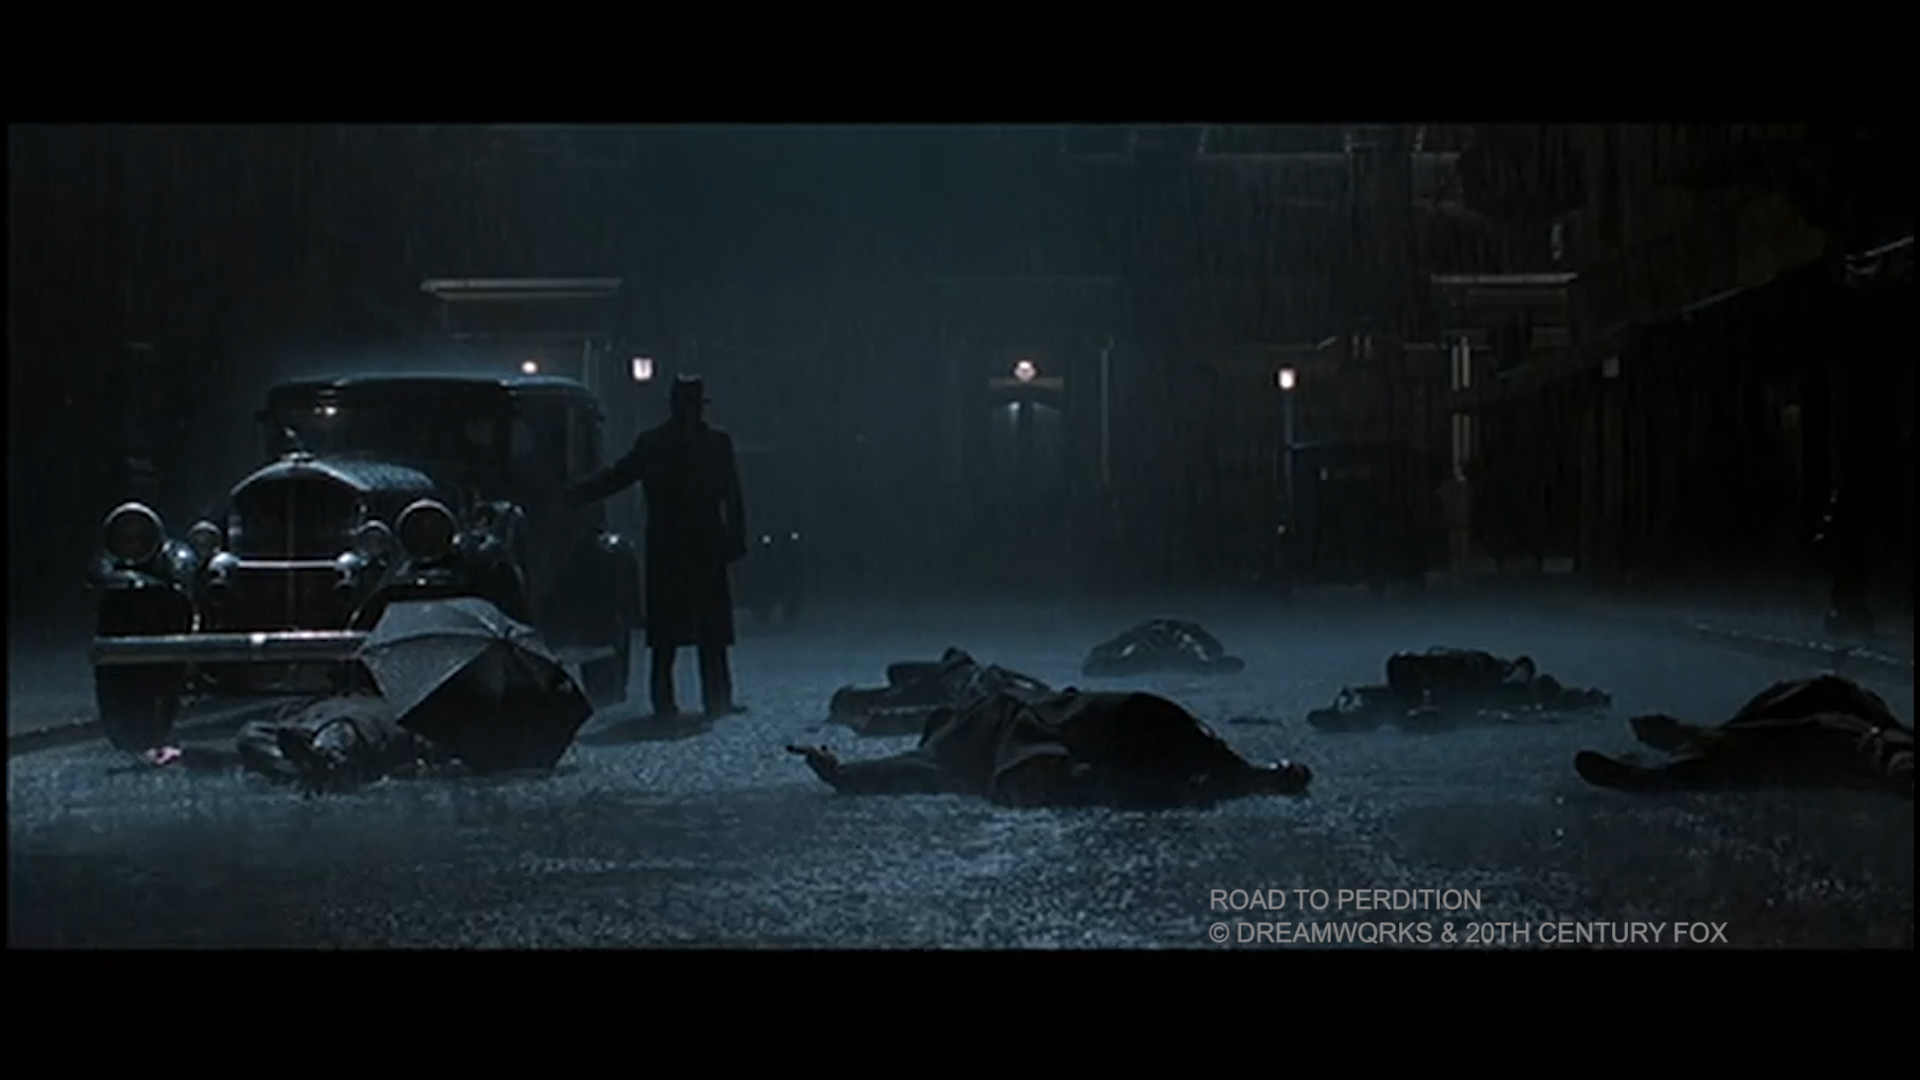 Visual Storytelling in Road to Perdition